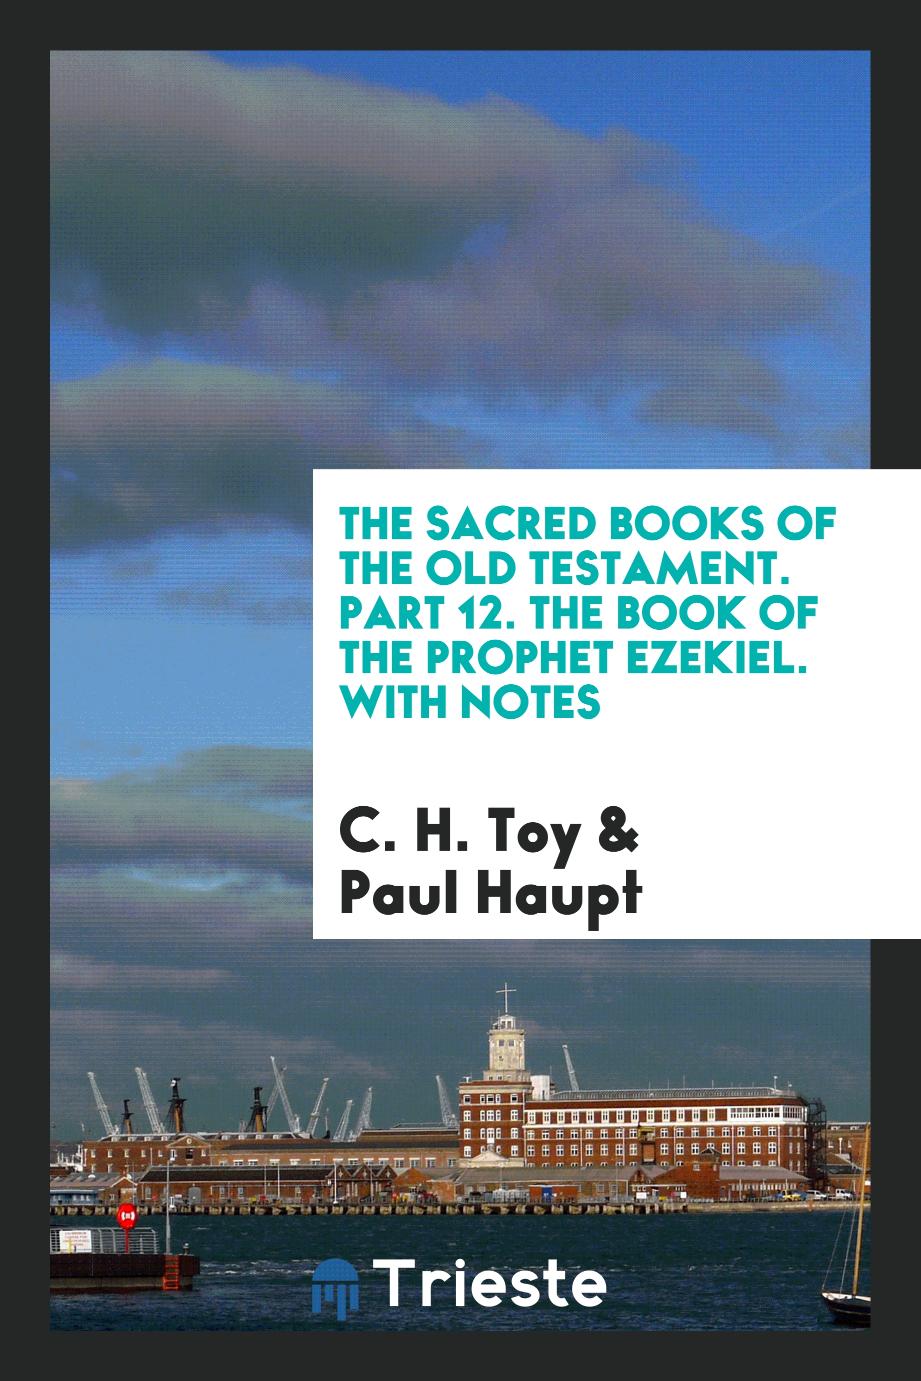 The Sacred Books of the Old Testament. Part 12. The Book of the Prophet Ezekiel. With Notes